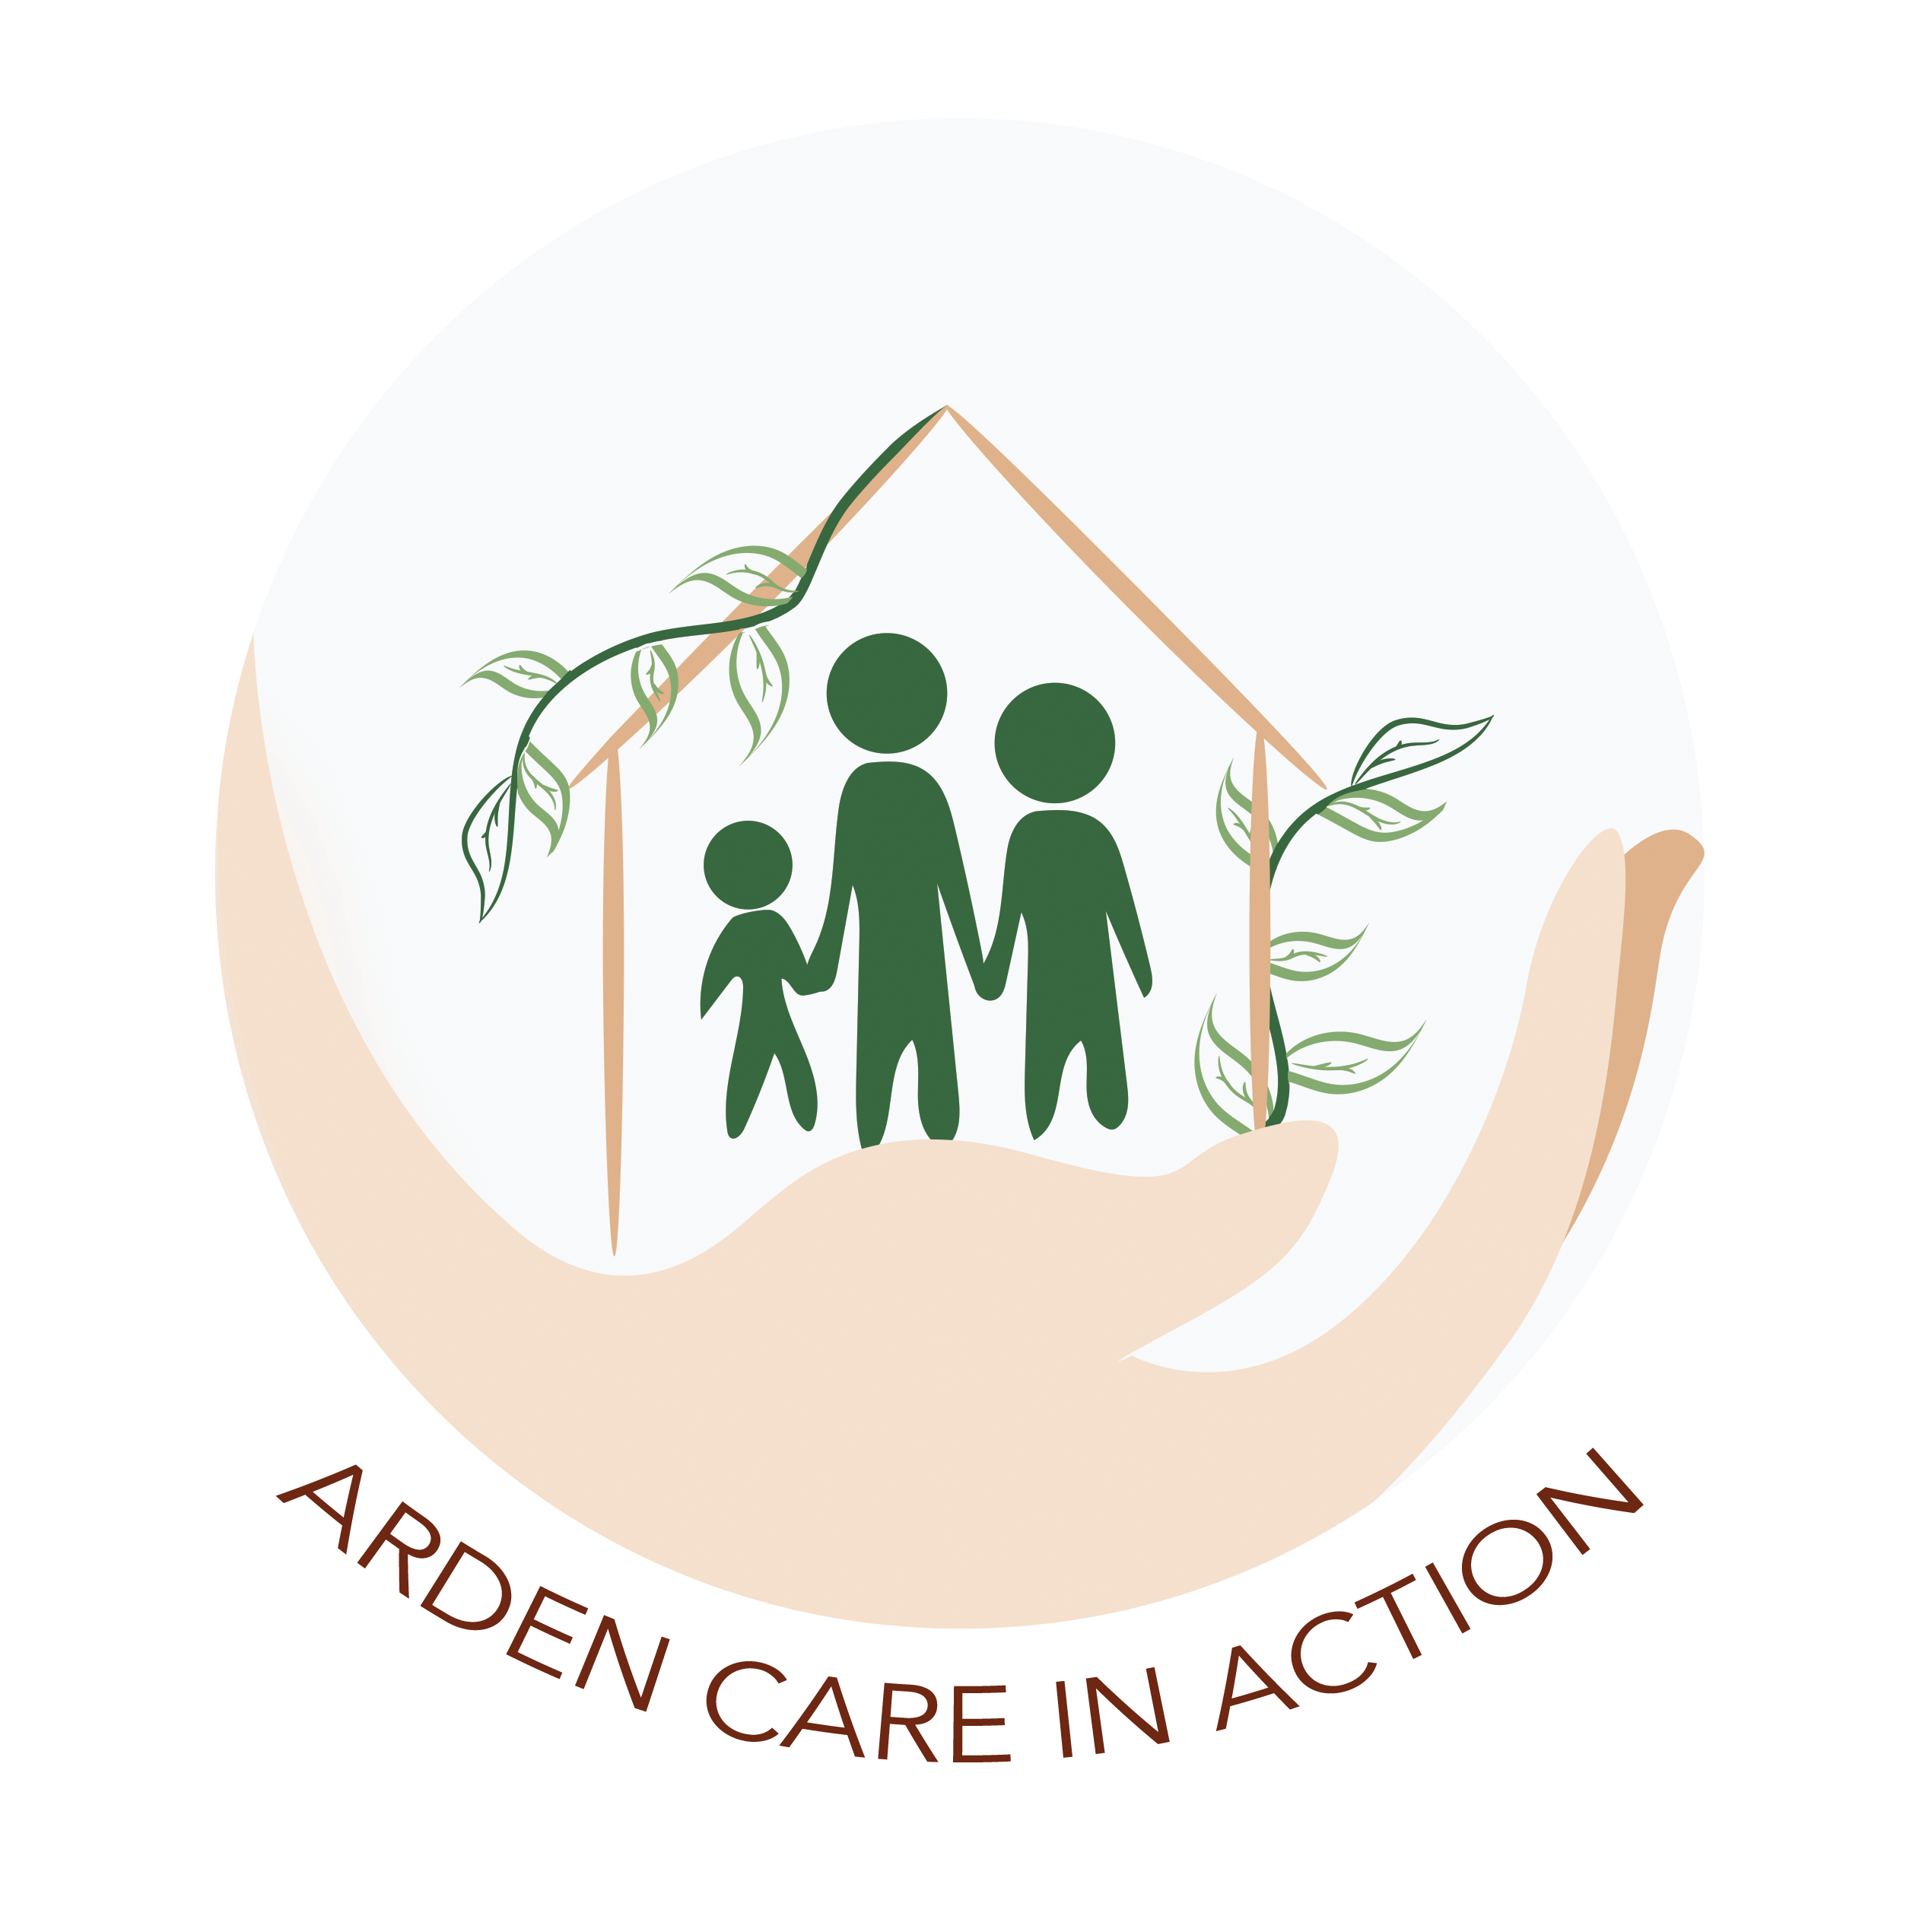 Arden Care In Action: A Light In The Dark